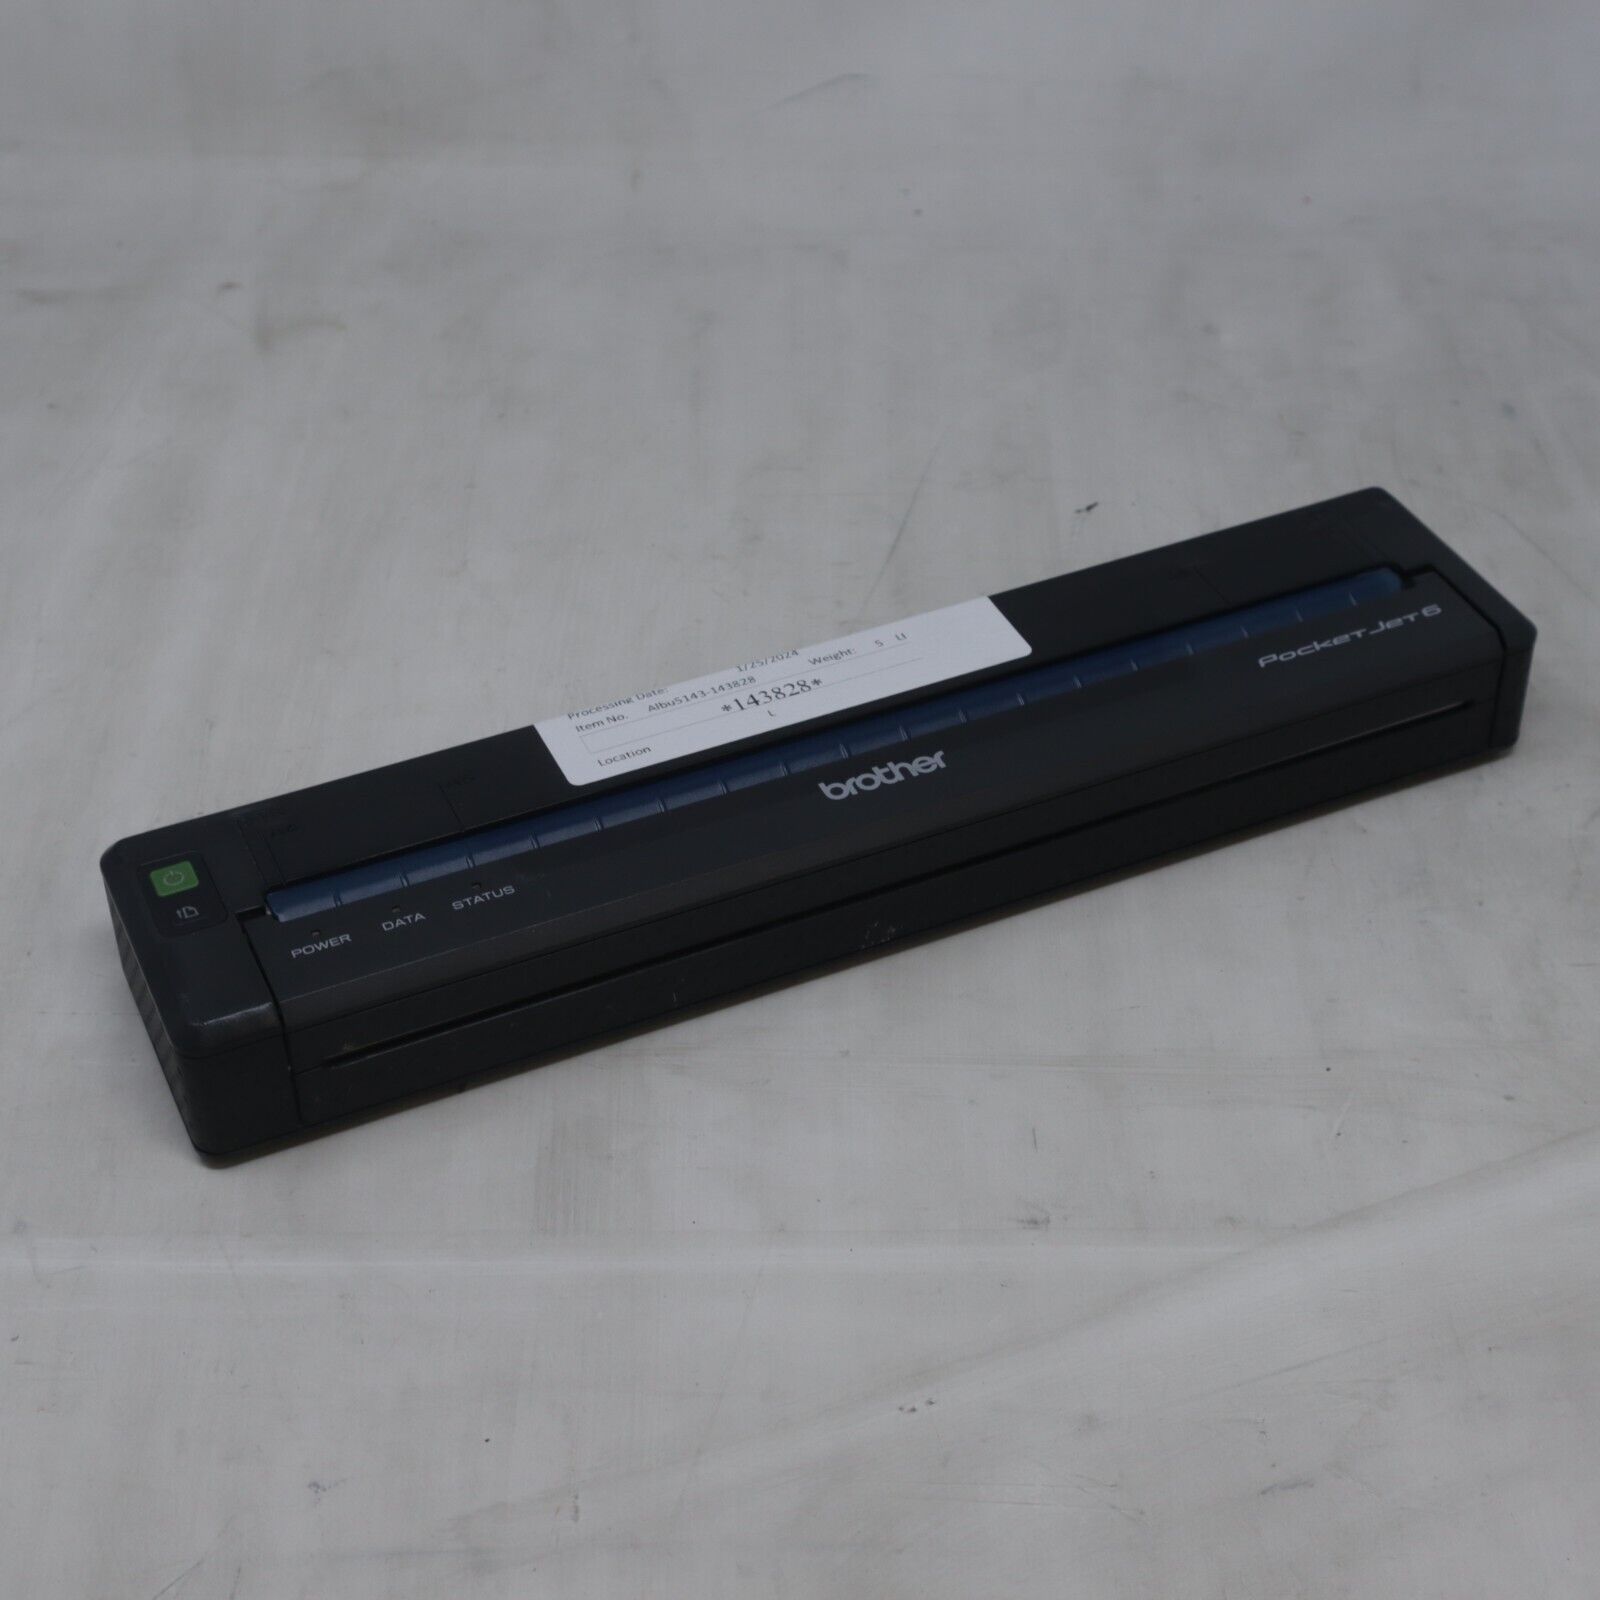 Brother Pocket Jet 6 PJ-622 Portable Thermal Printer - No Battery/Cables